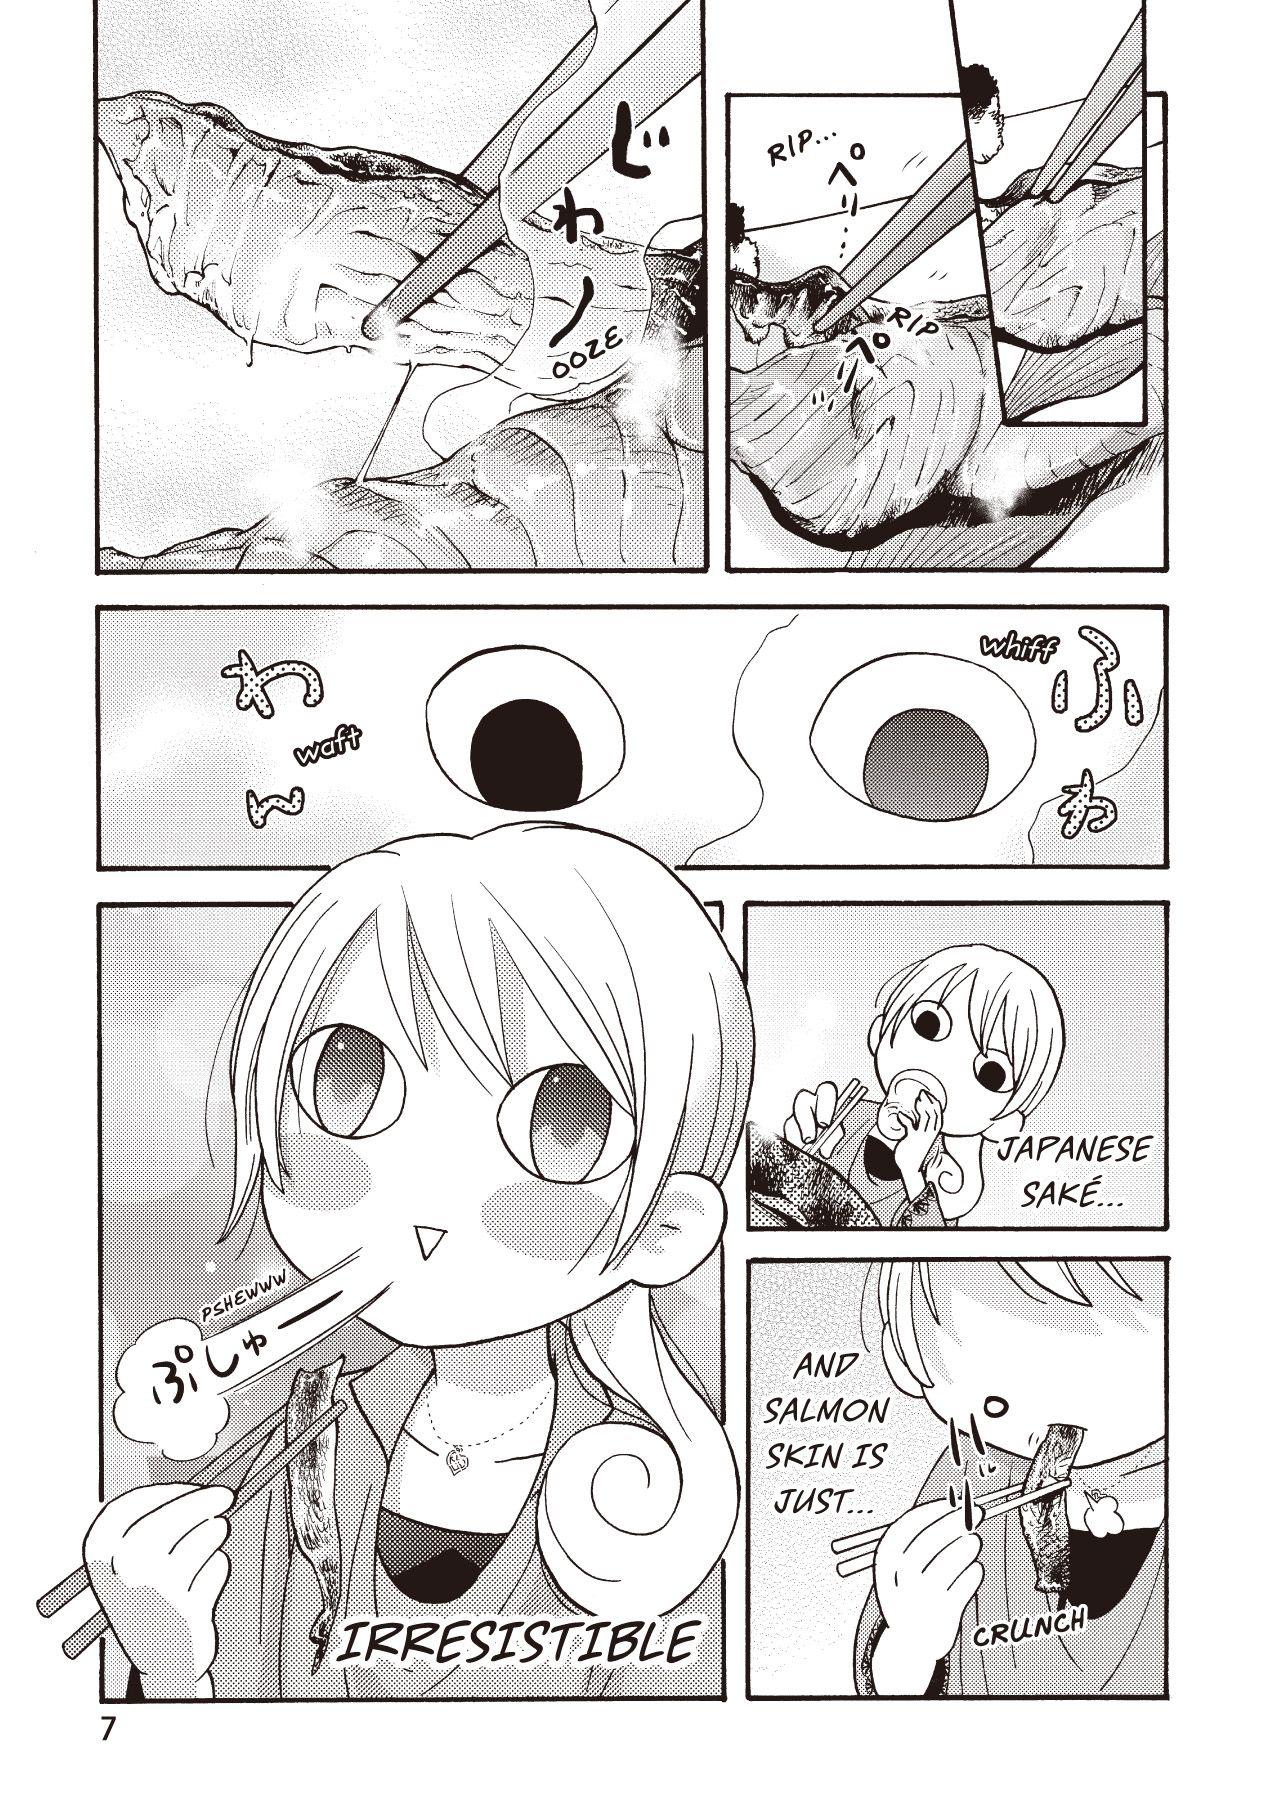 Manga page showing a woman with big, round eyes eating salmon and drinking sake. She describes them as “irresistible.” The salmon looks delicious.